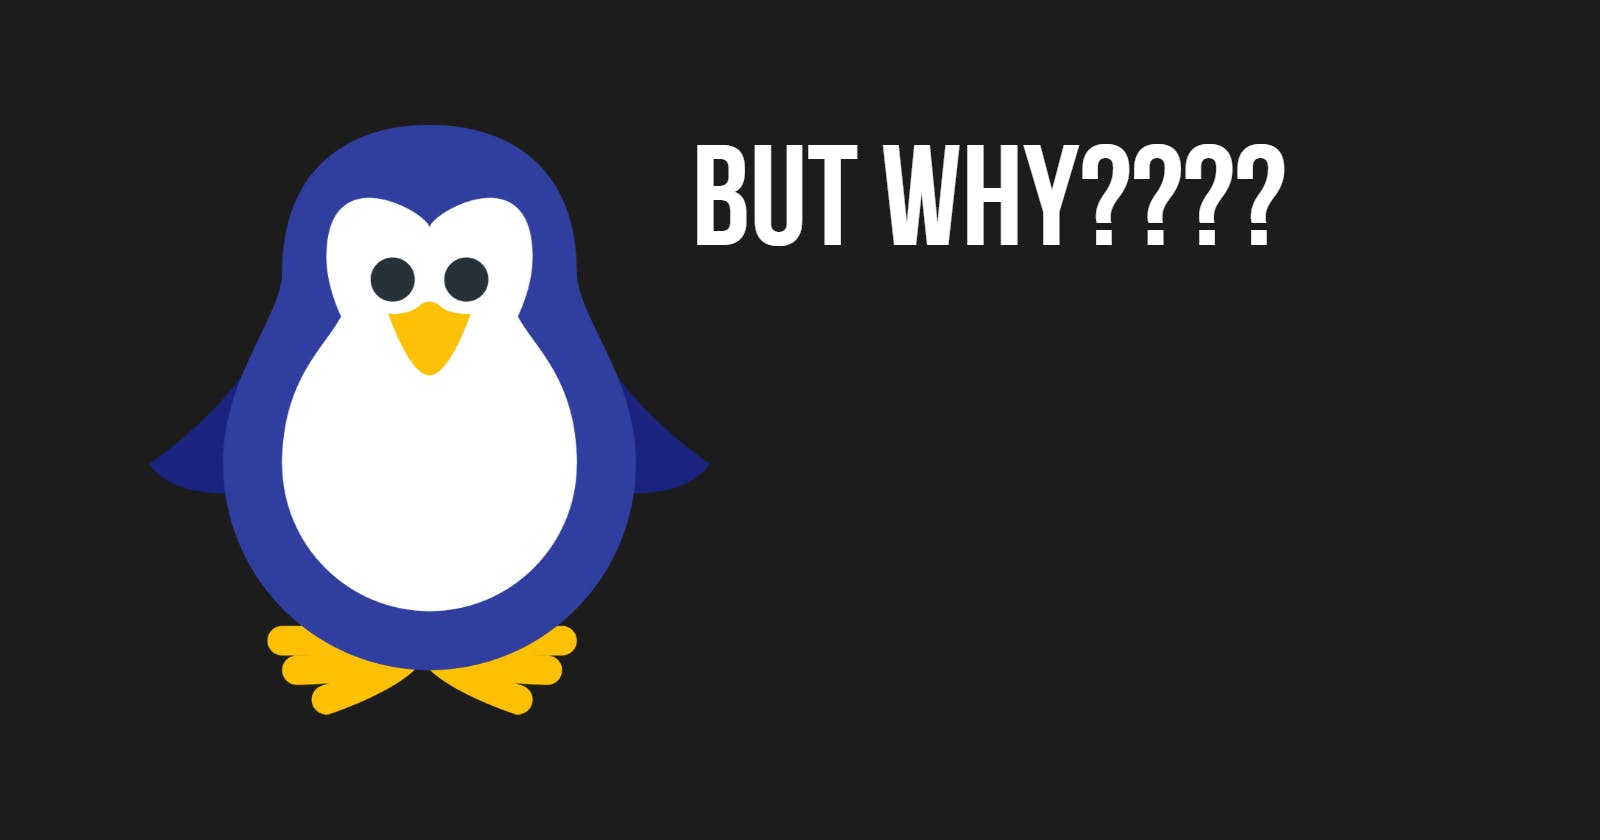 Why Linux 🐧?